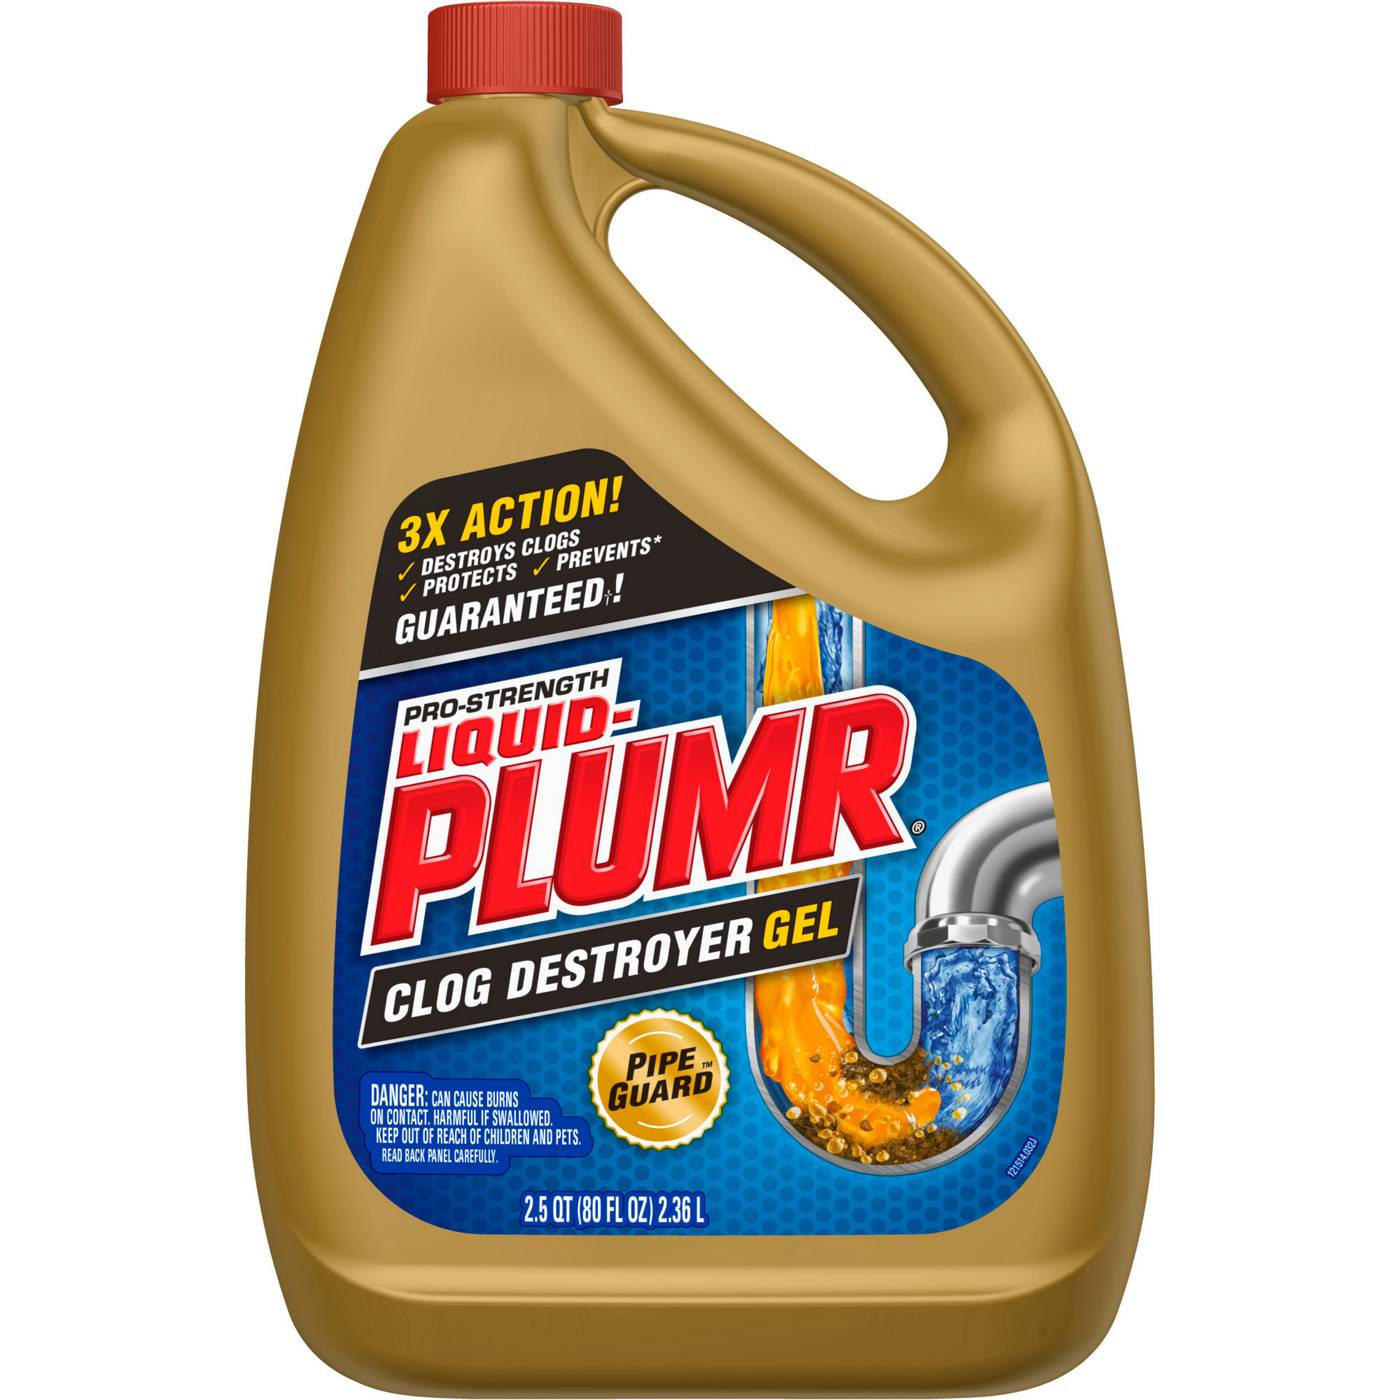 Liquid-Plumr Pro-Strength Clog Destroyer Gel with PipeGuard, Liquid Drain Cleaner; image 1 of 8